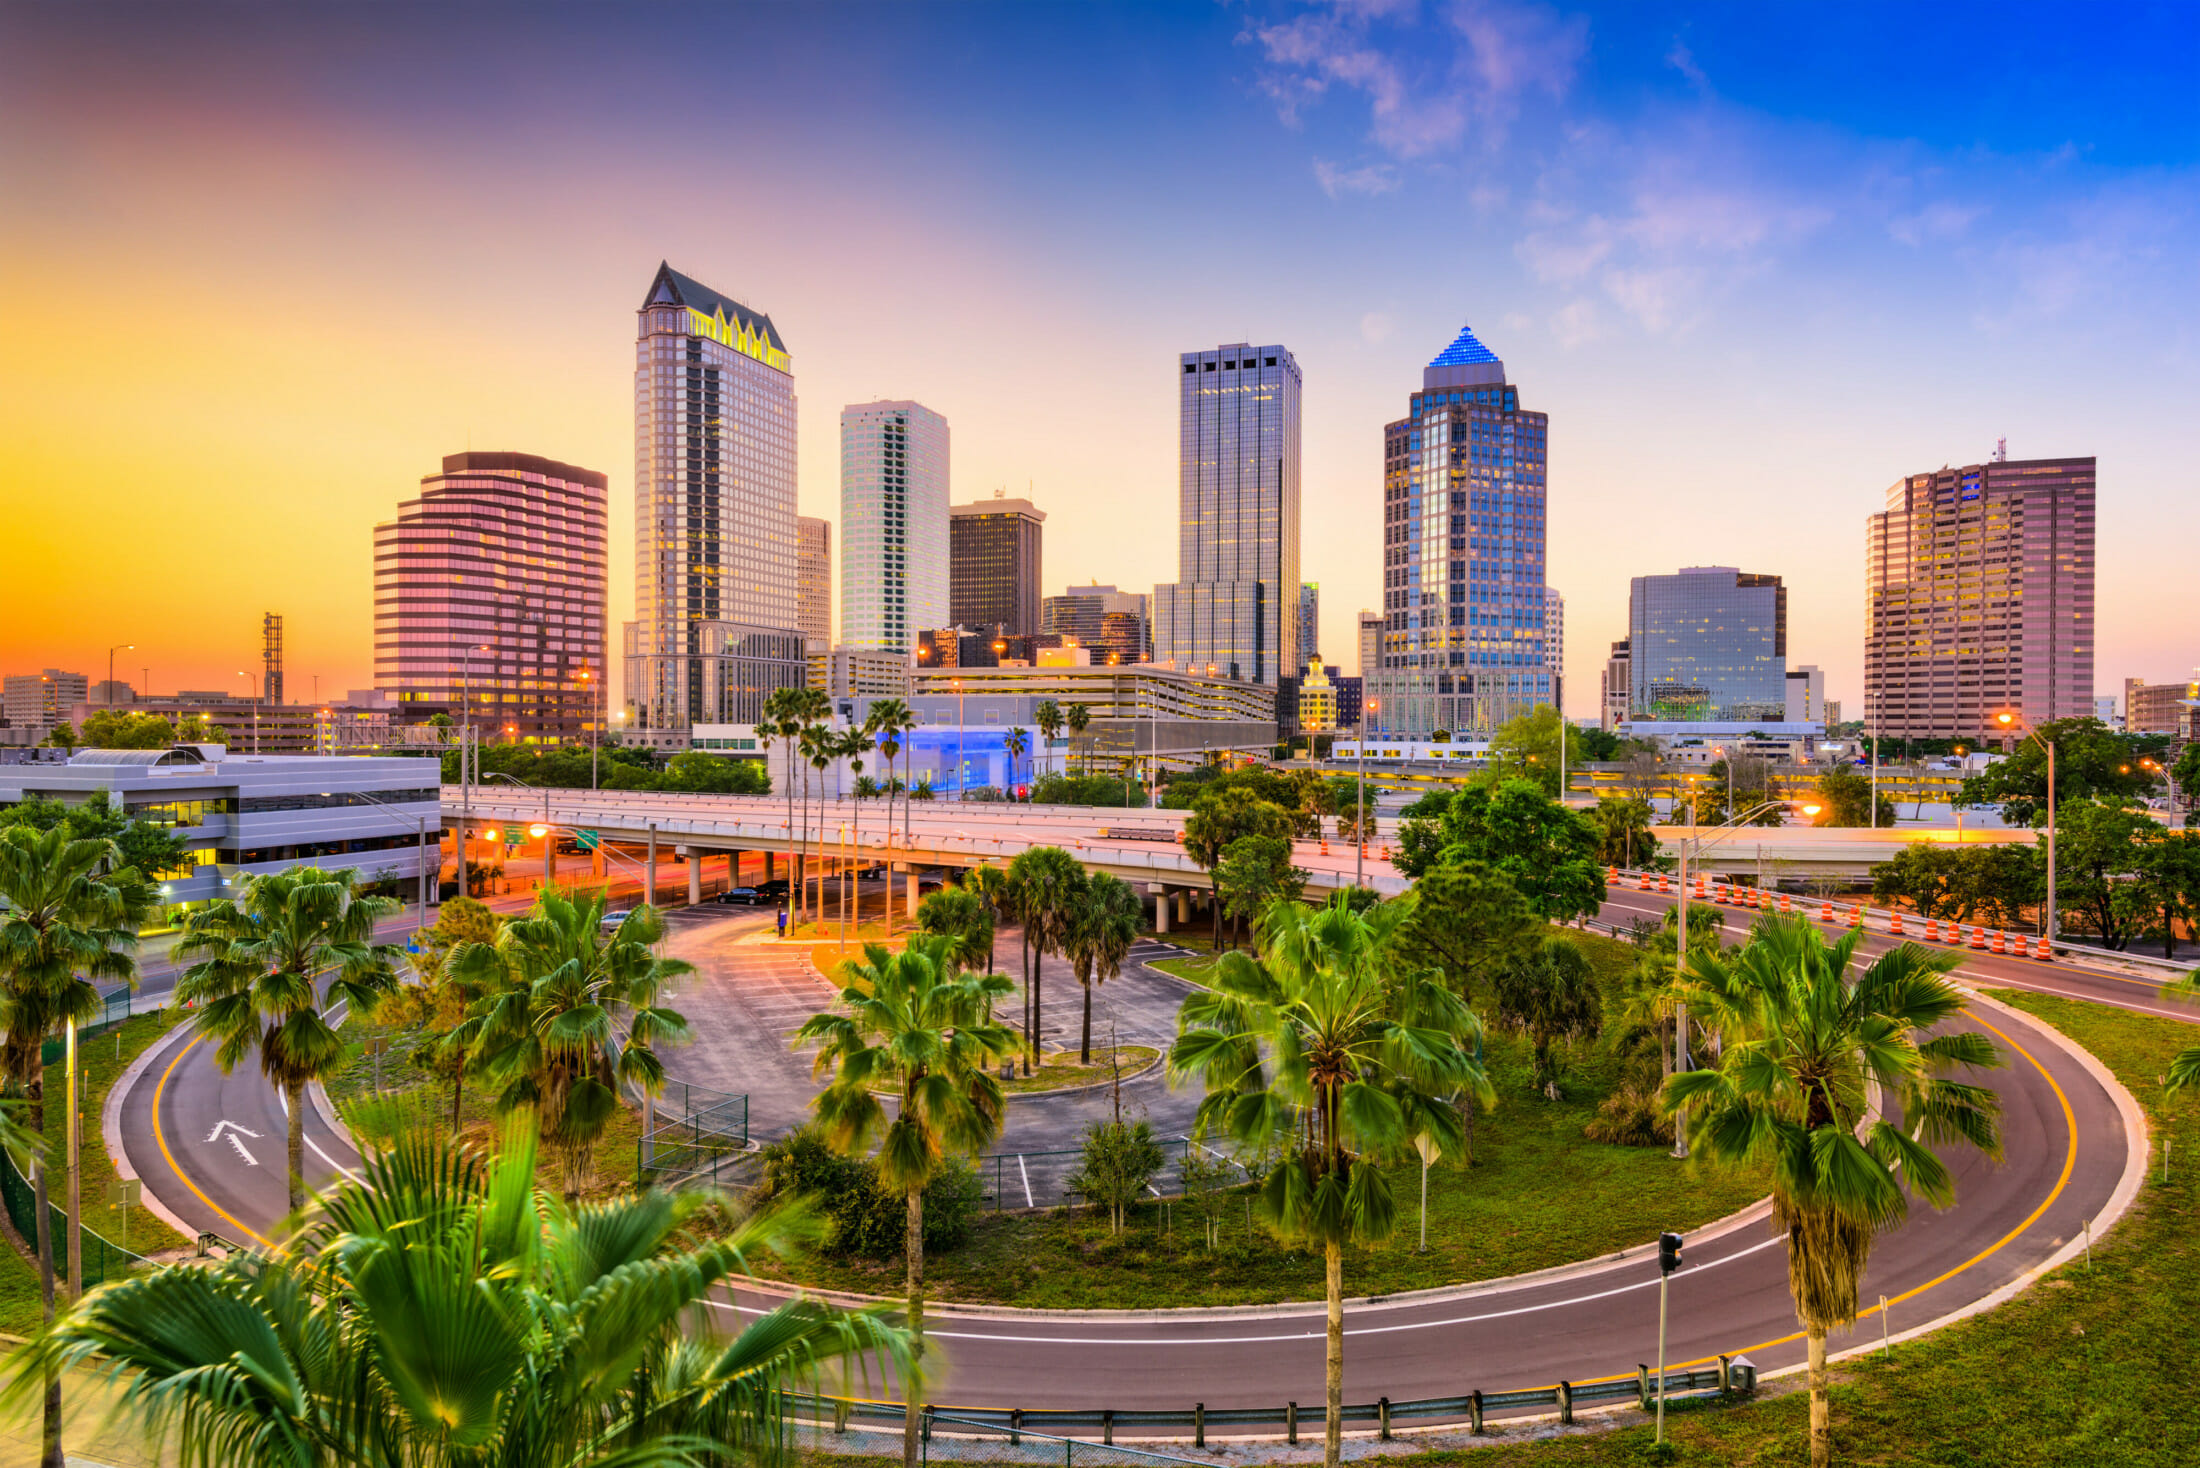 Tampa, Florida | 50 Up-and-Coming Real Estate Markets to Watch in 2019 | Buildium